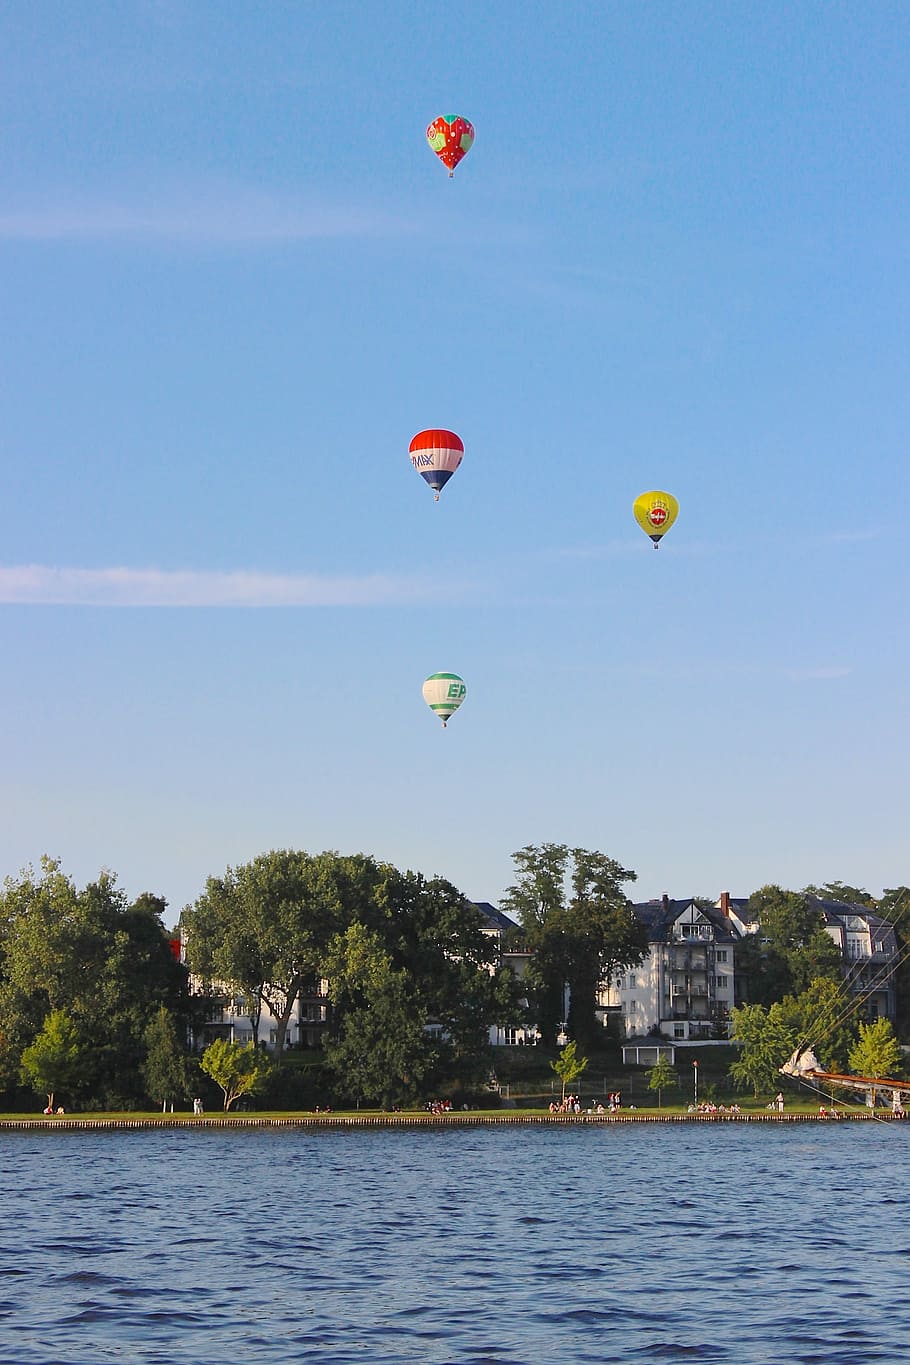 Ballons, Hot Air Balloon, Water, Rostock, take off, air sports, mid-air, flying, sky, outdoors